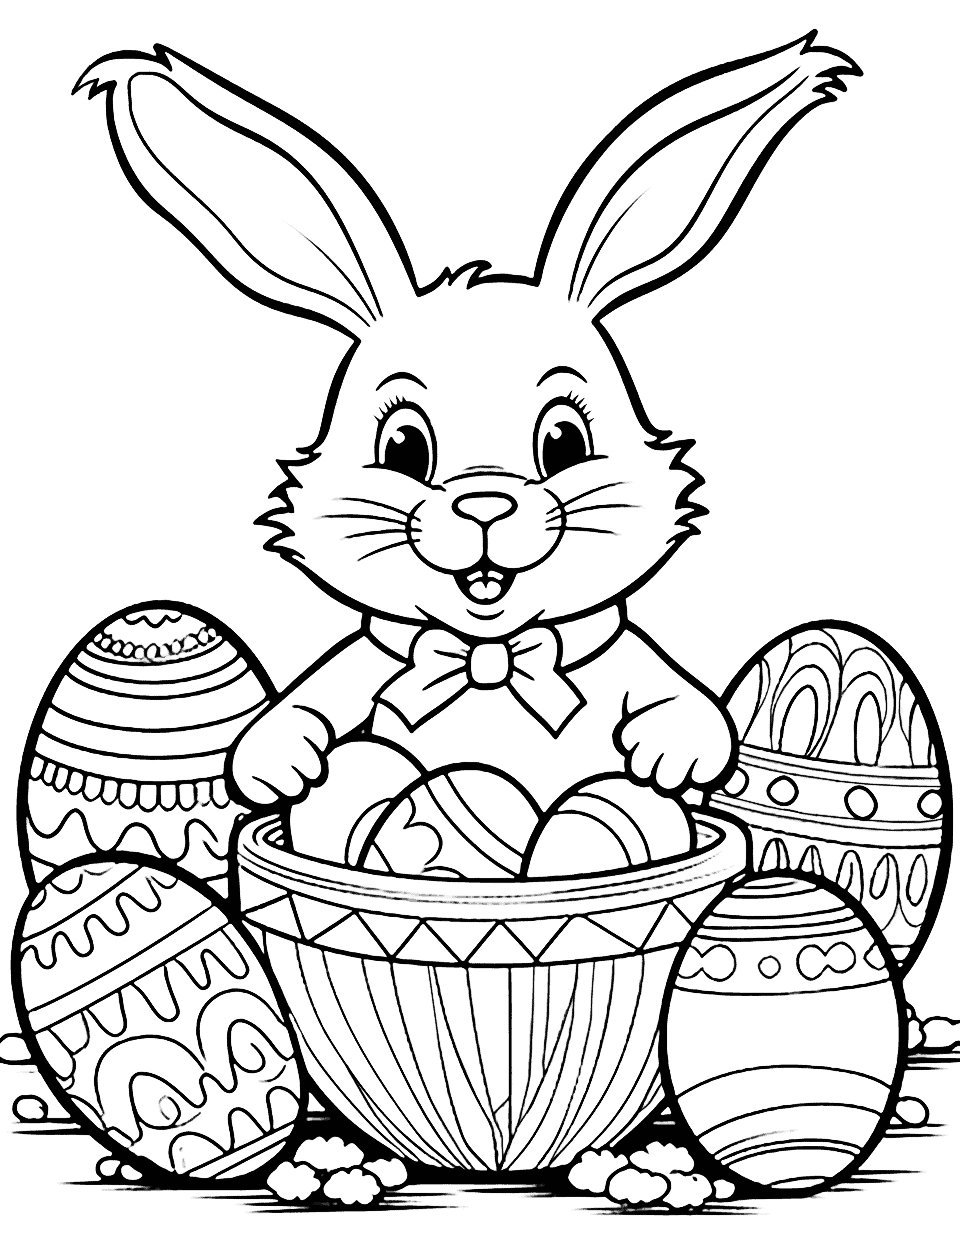 35 Easter Coloring Pages: Free Printable Sheets in Easter Coloring Pages Free Printable